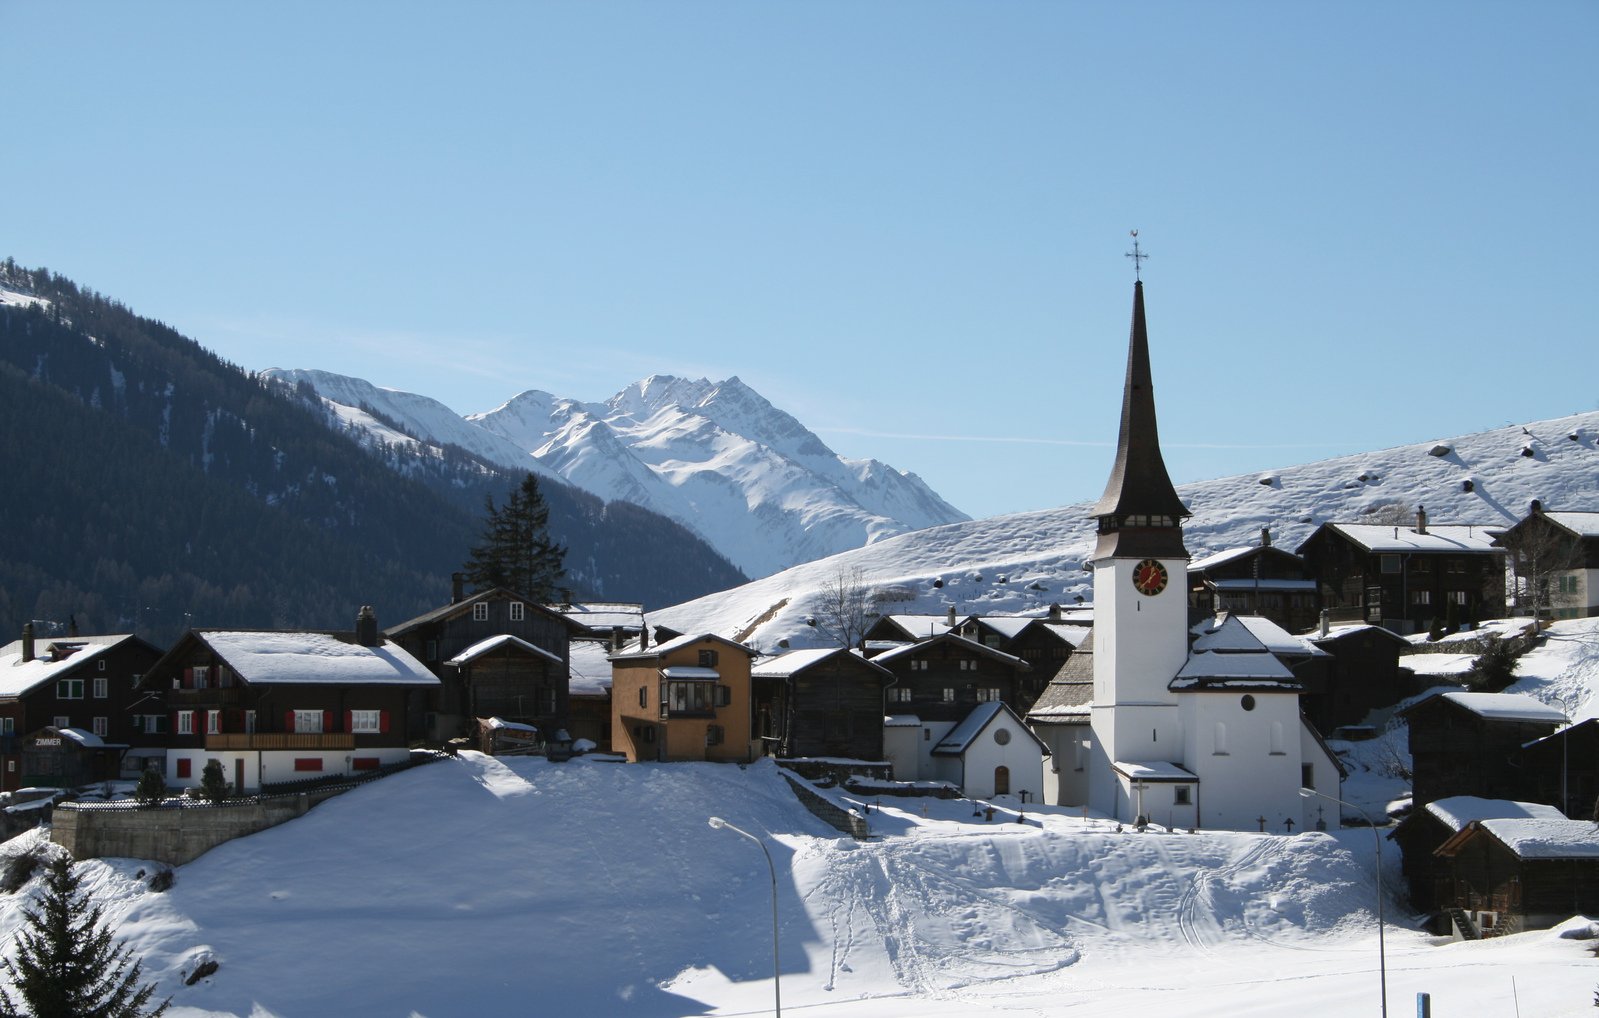 the town is surrounded by snow covered mountains